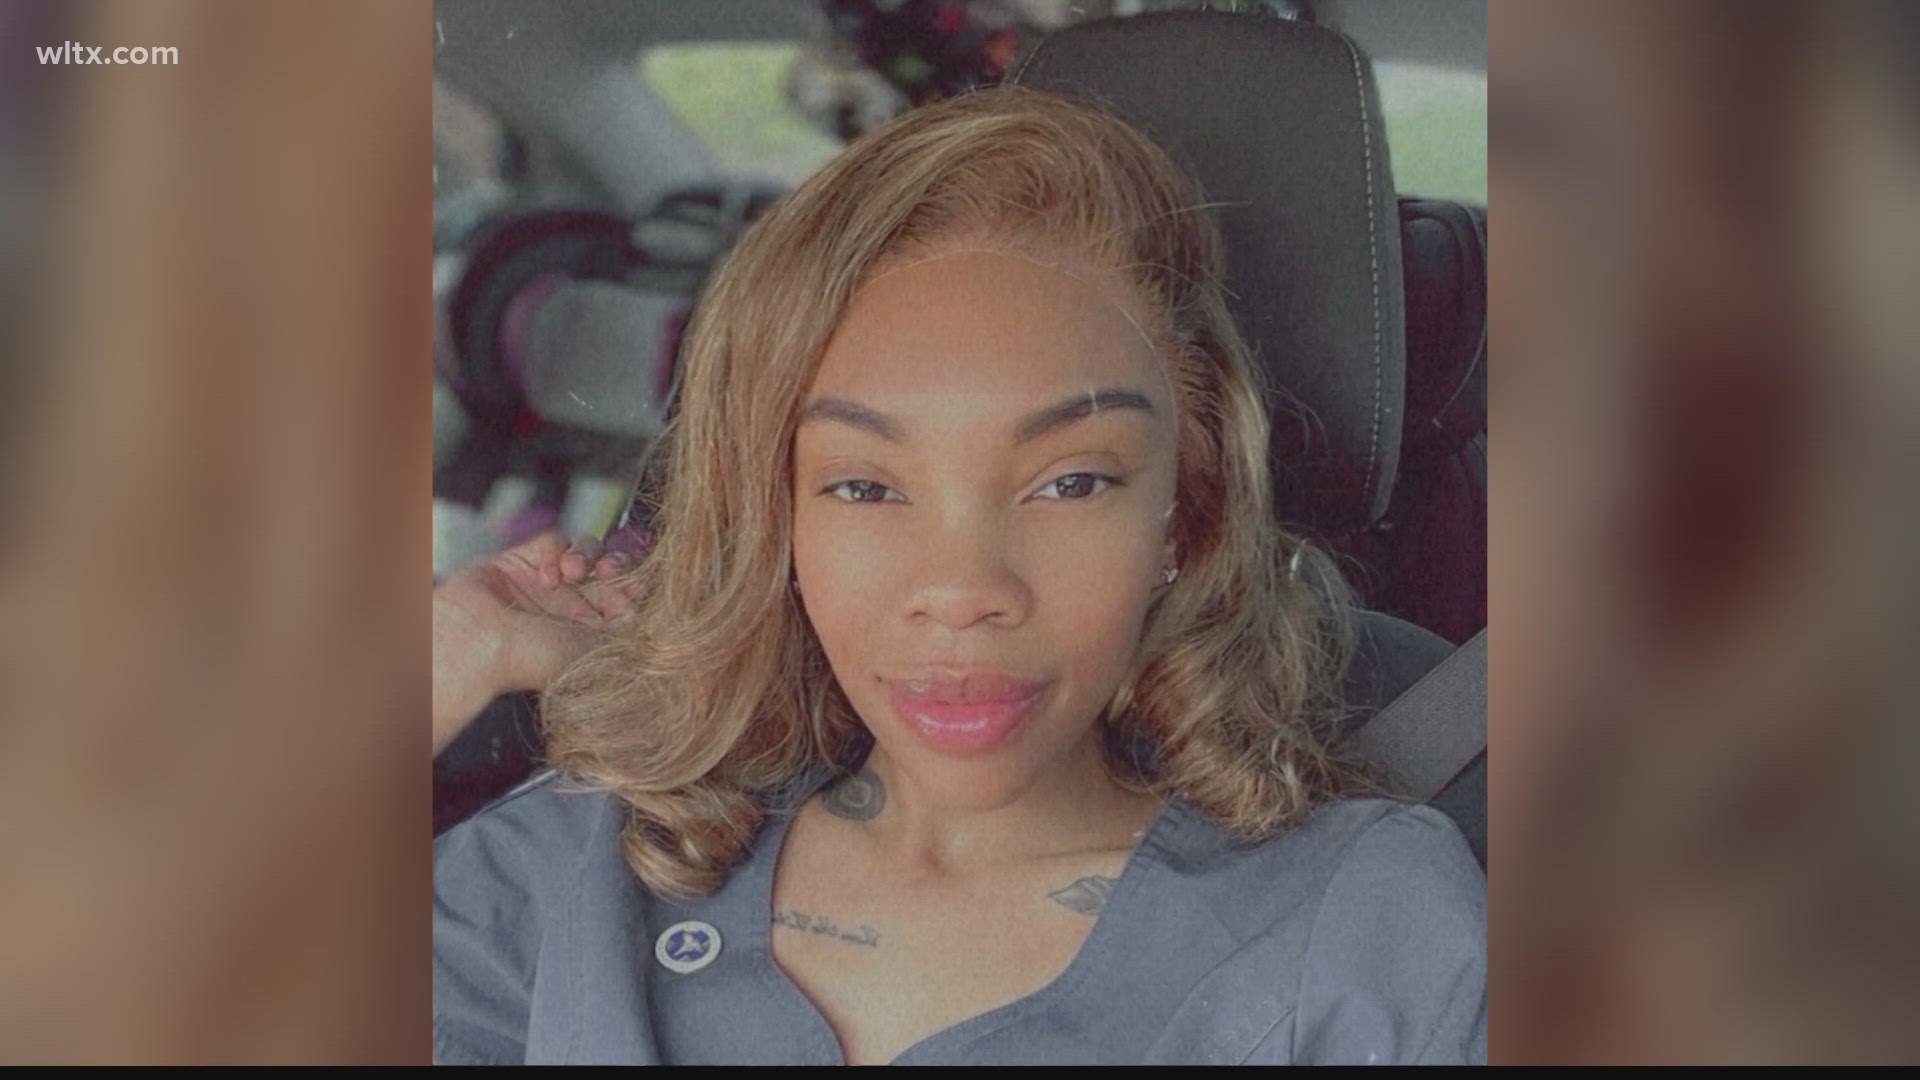 Keyirra Walker, 25 was found shot and killed inside her home.  She was five month pregnant and has two other children who were not at home at the time.